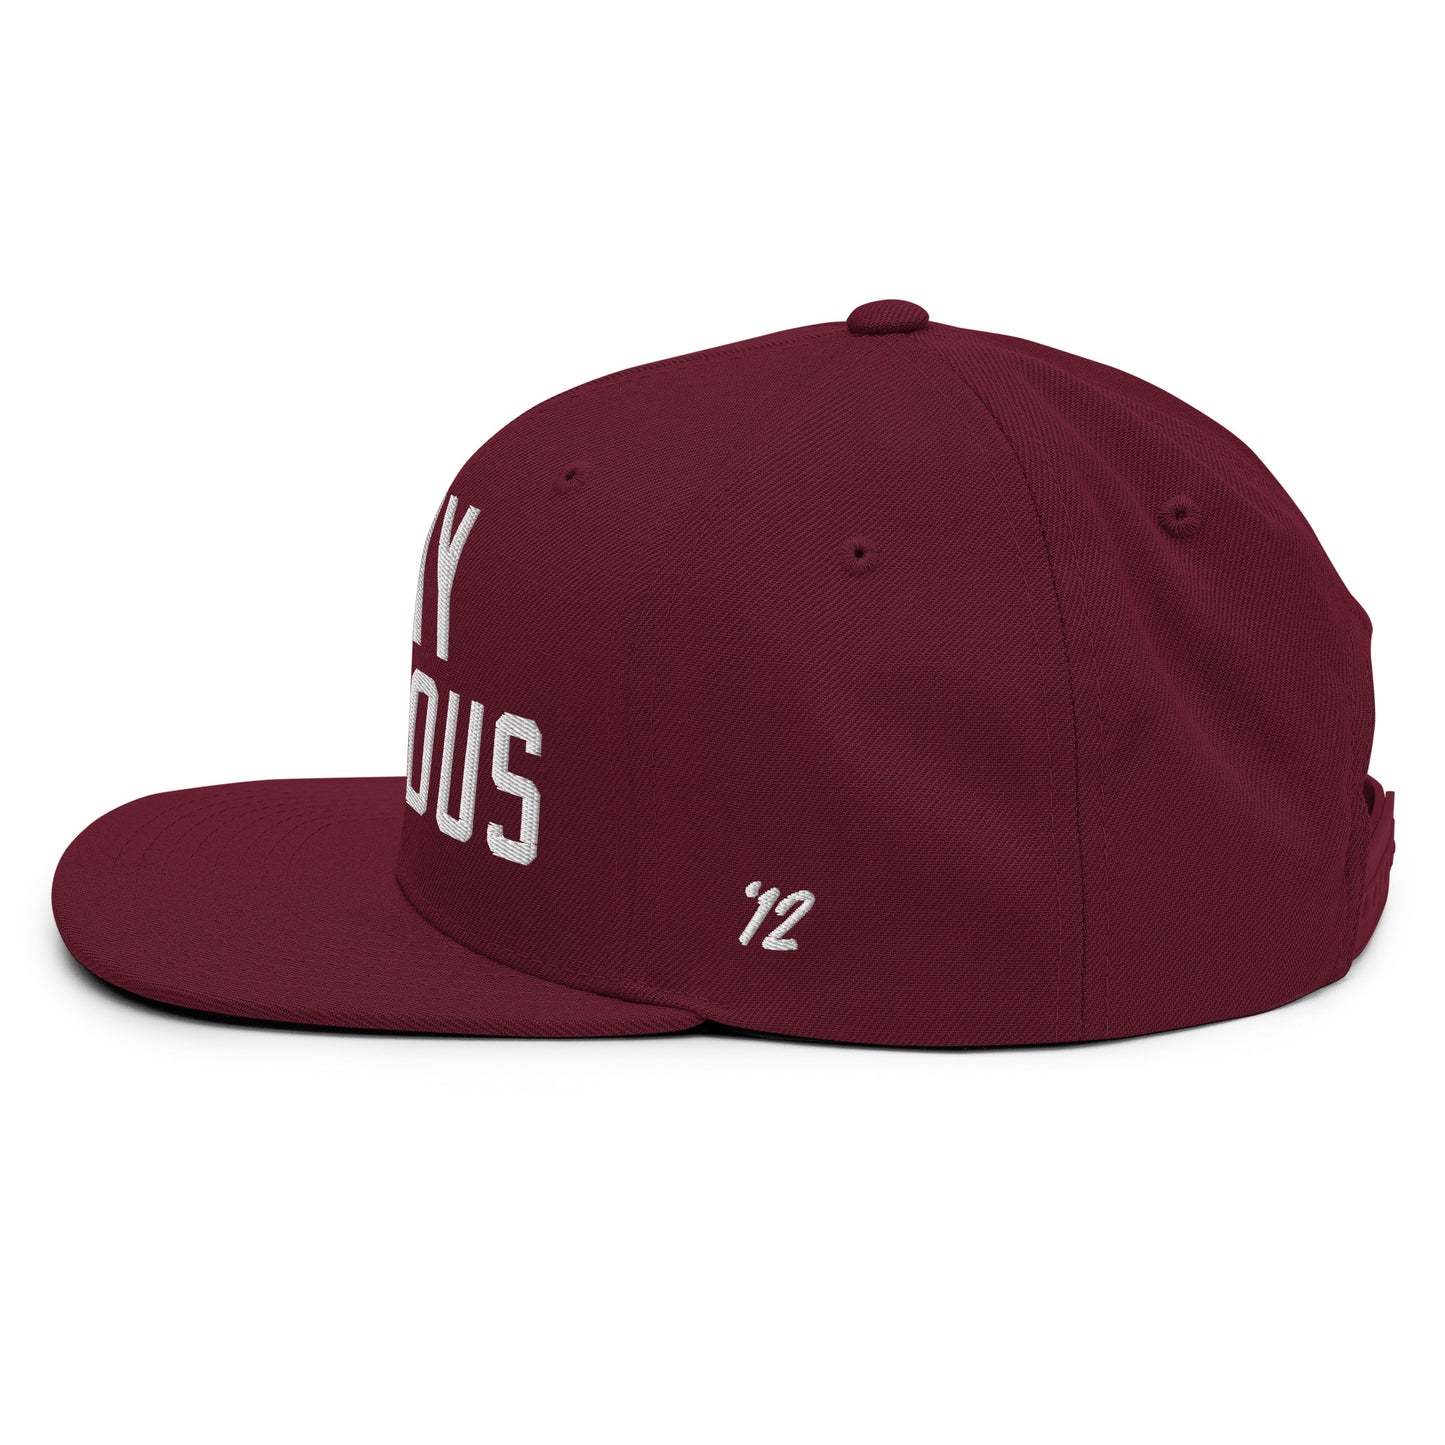 Oh My Gracious - Texas A&M - Maroon Hat